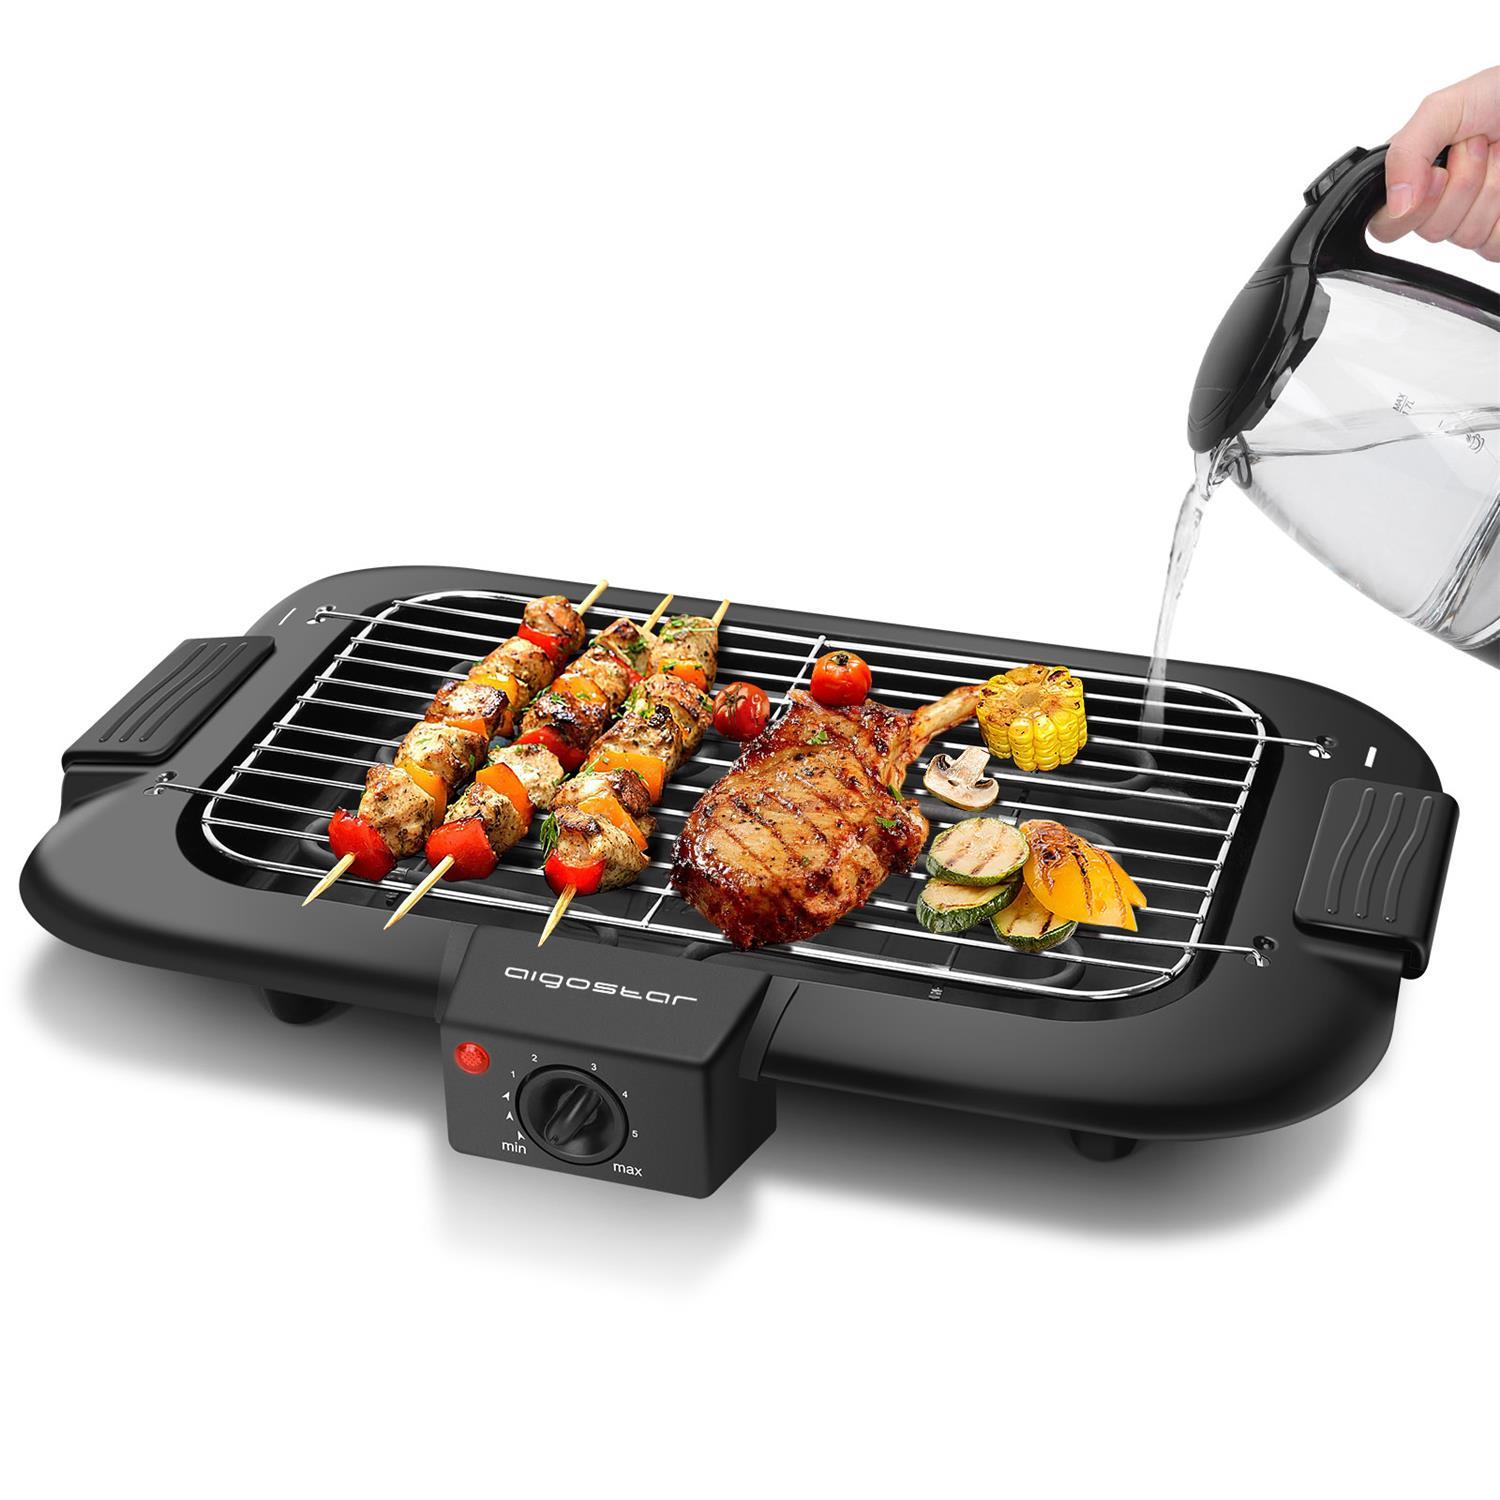 2000 W Electric Grill,separated body design, washable tray *Aigostar Tasty*